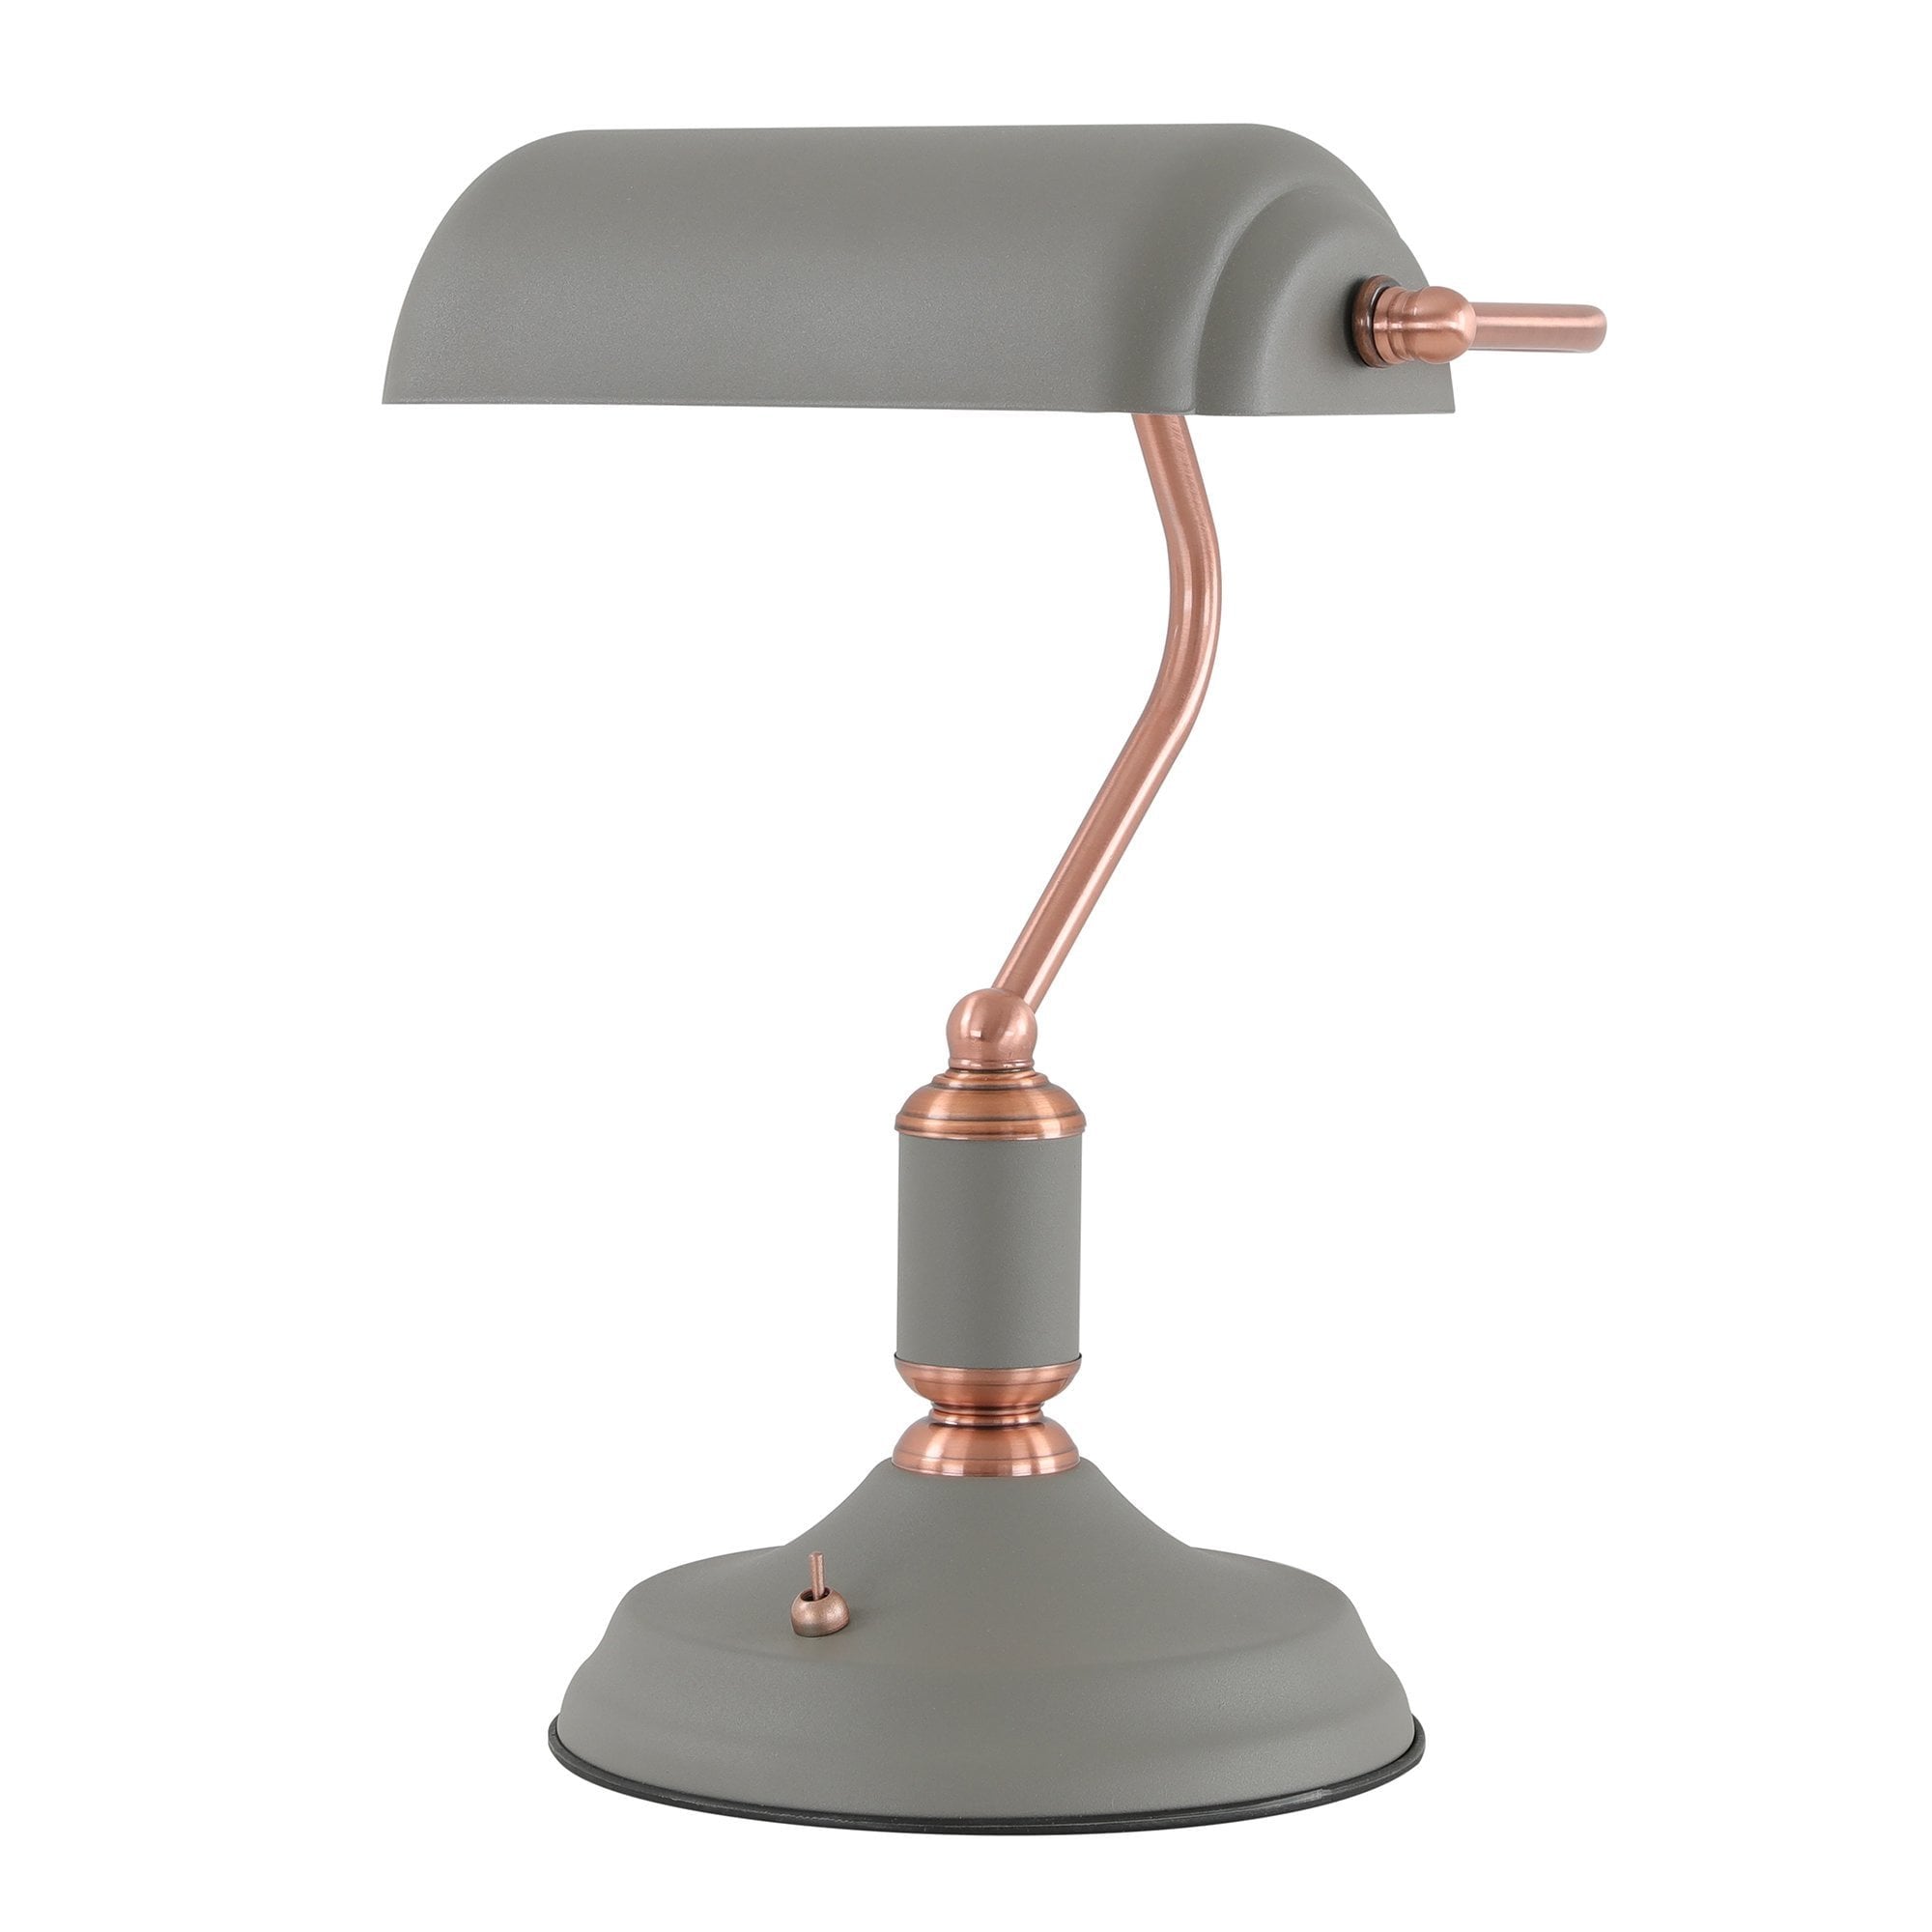 Table Lamp 1 Light With Toggle Switch, Sand Grey/Copper